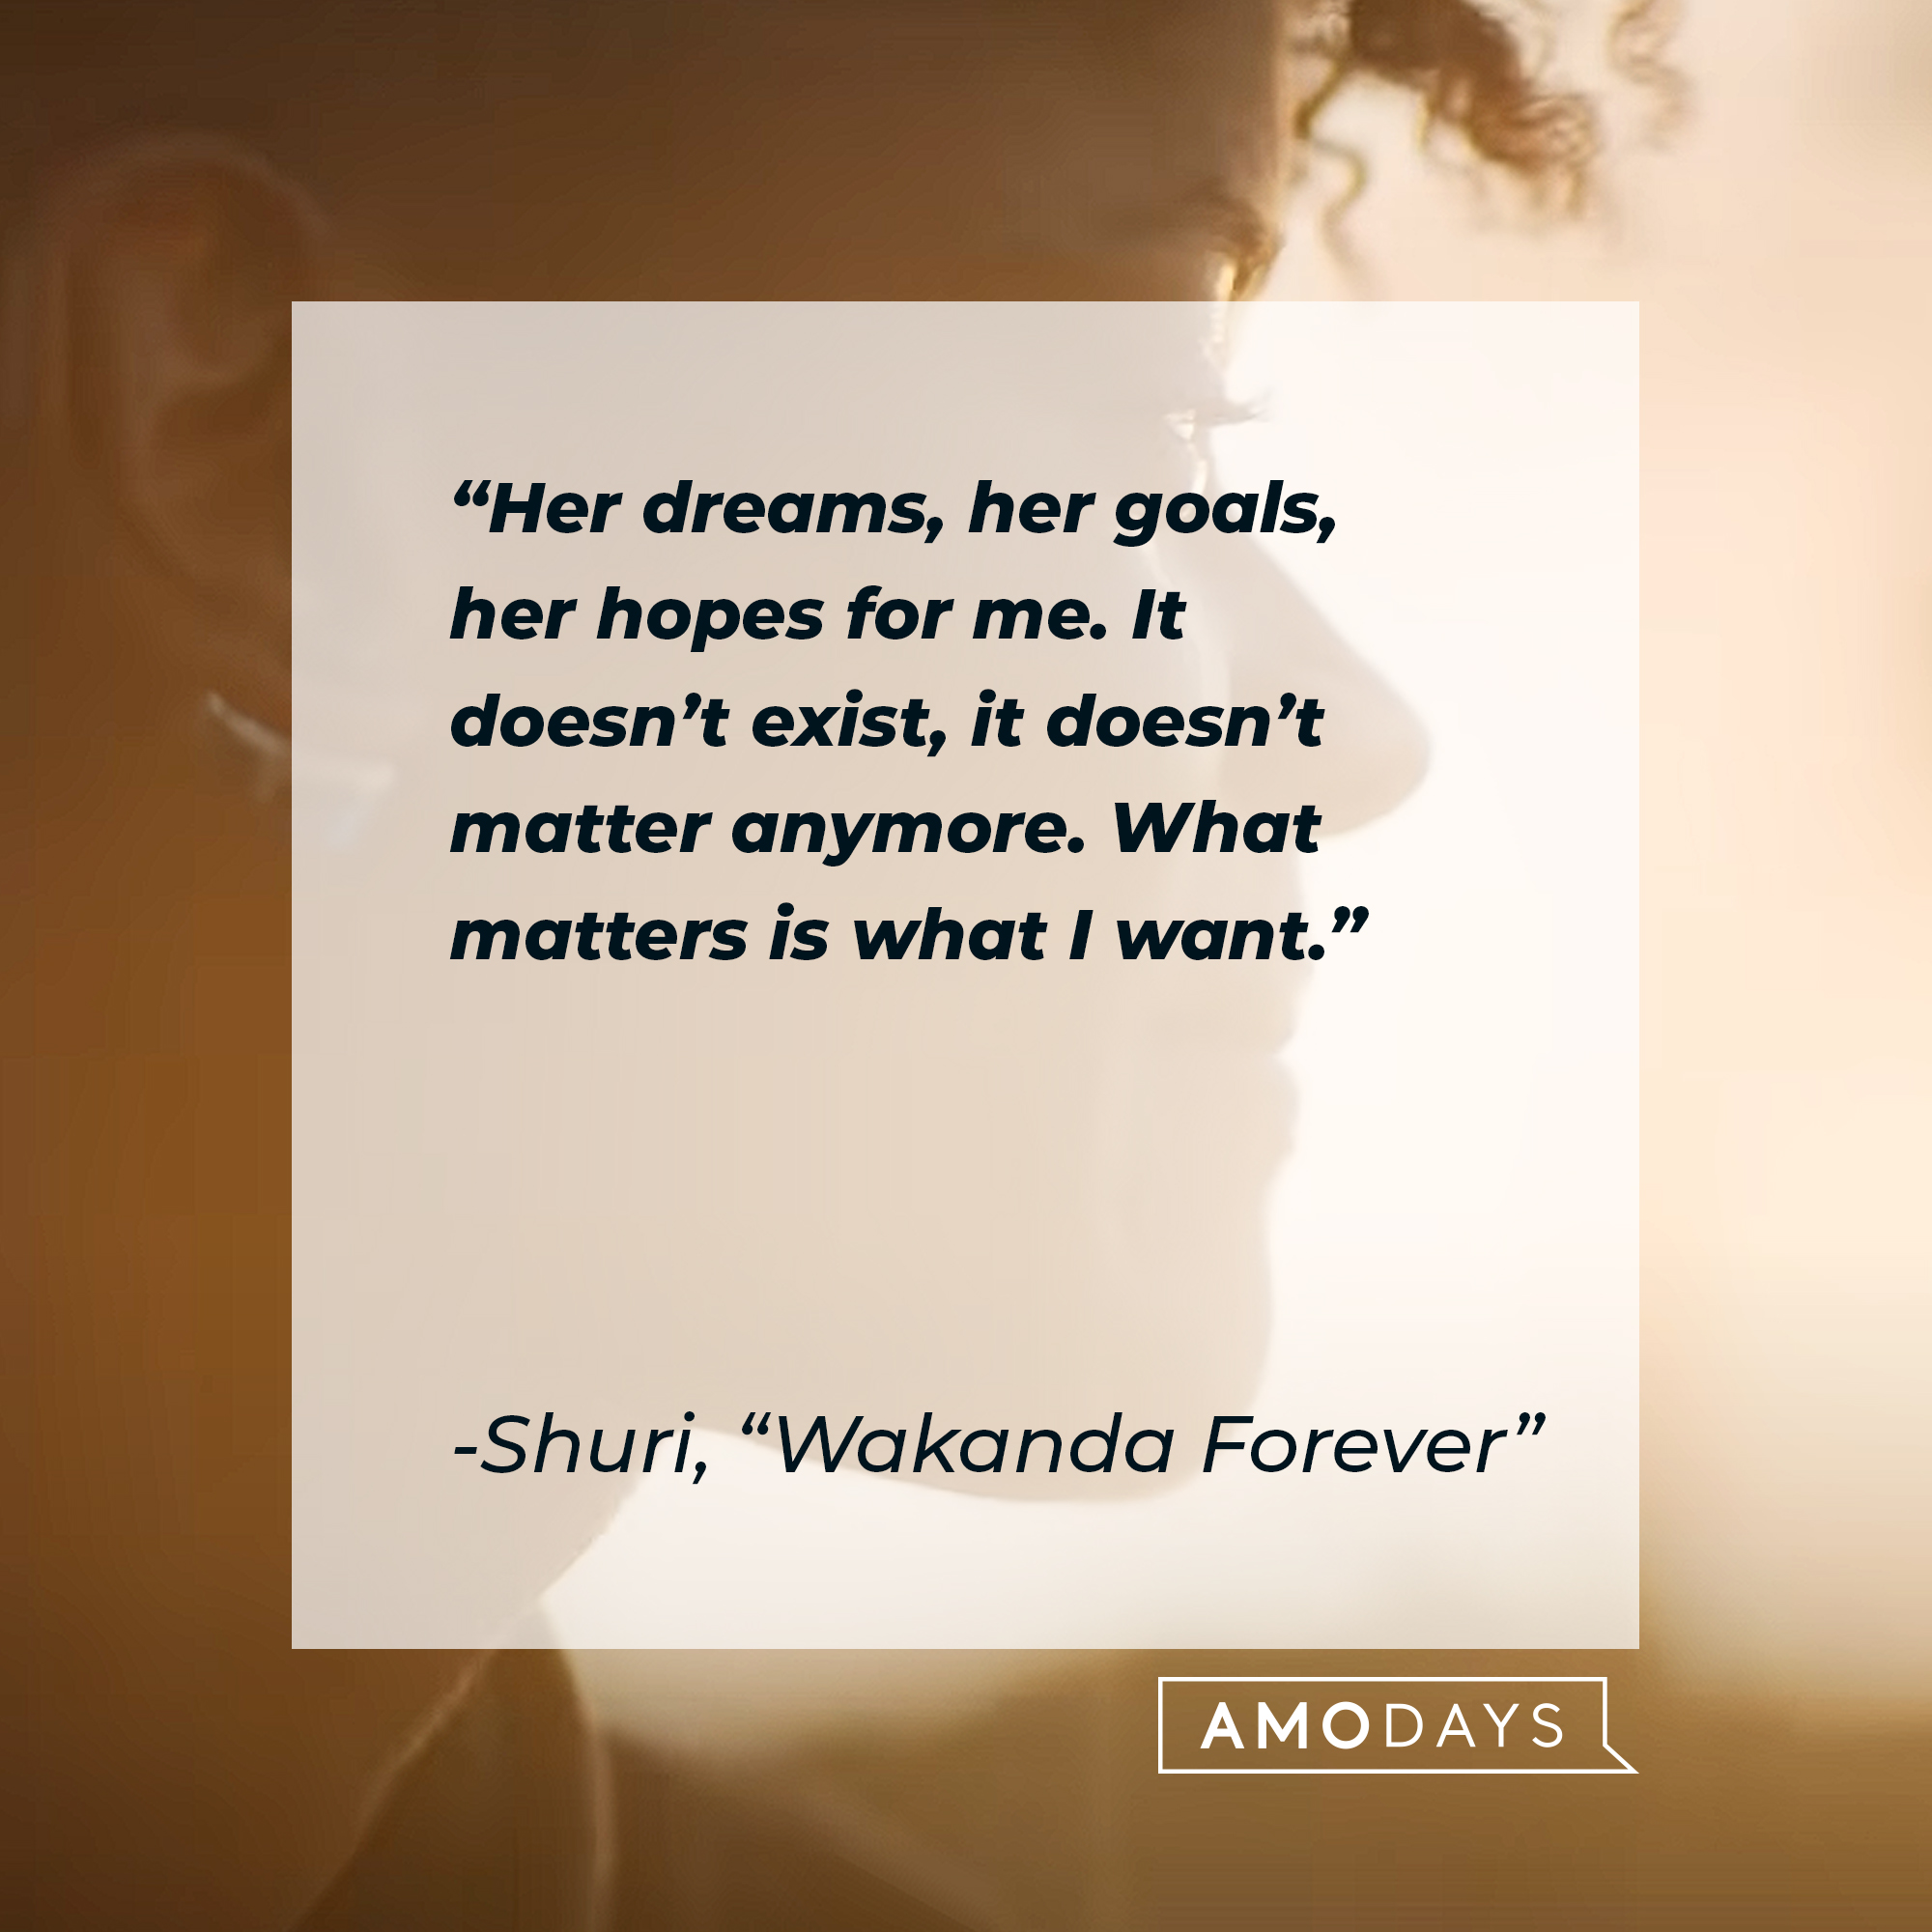 Shuri's quote from "Wakanda Forever:" “Her dreams, her goals, her hopes for me. It doesn’t exist, it doesn’t matter anymore. What matters is what I want.” | Source: Youtube.com/marvel